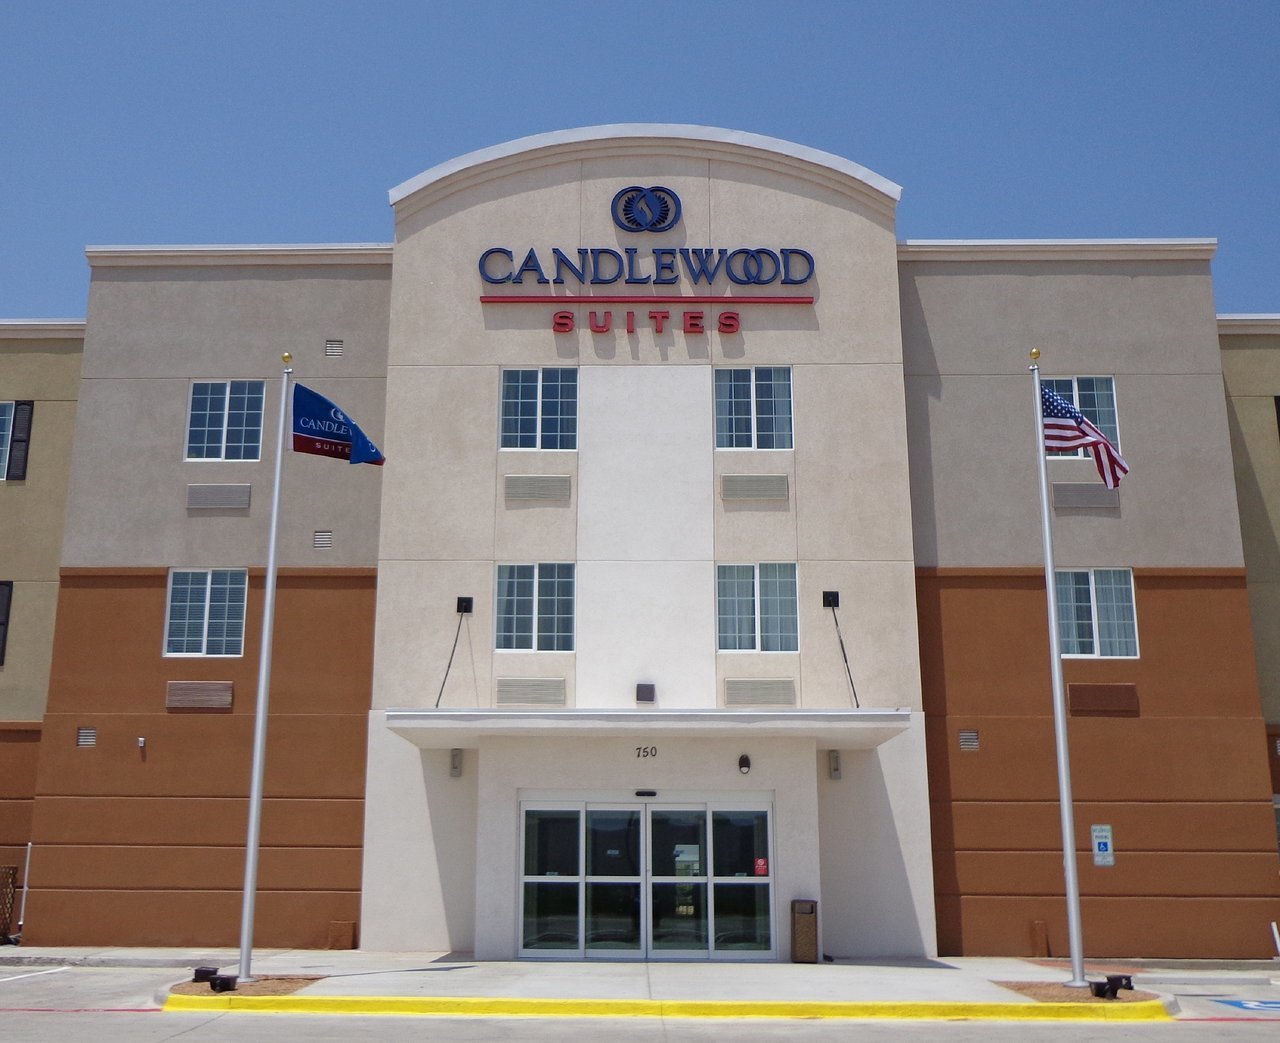 Photo of Candlewood Suites Odessa, Odessa, TX